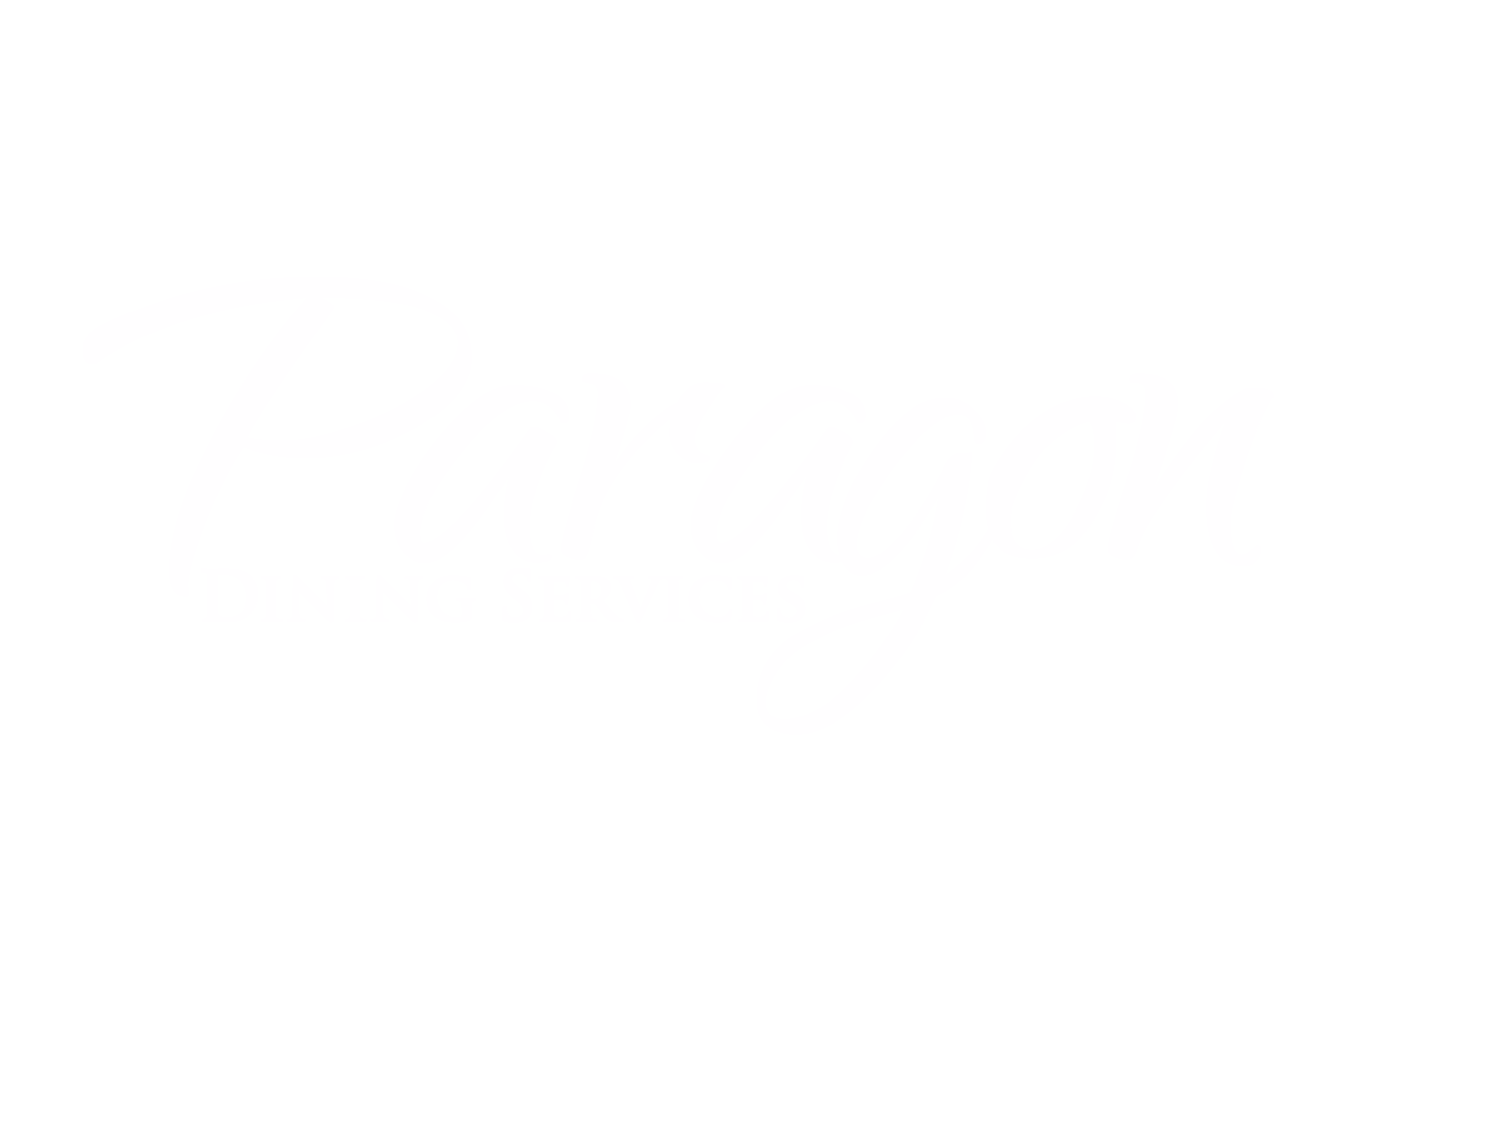 Paragon Dining Services